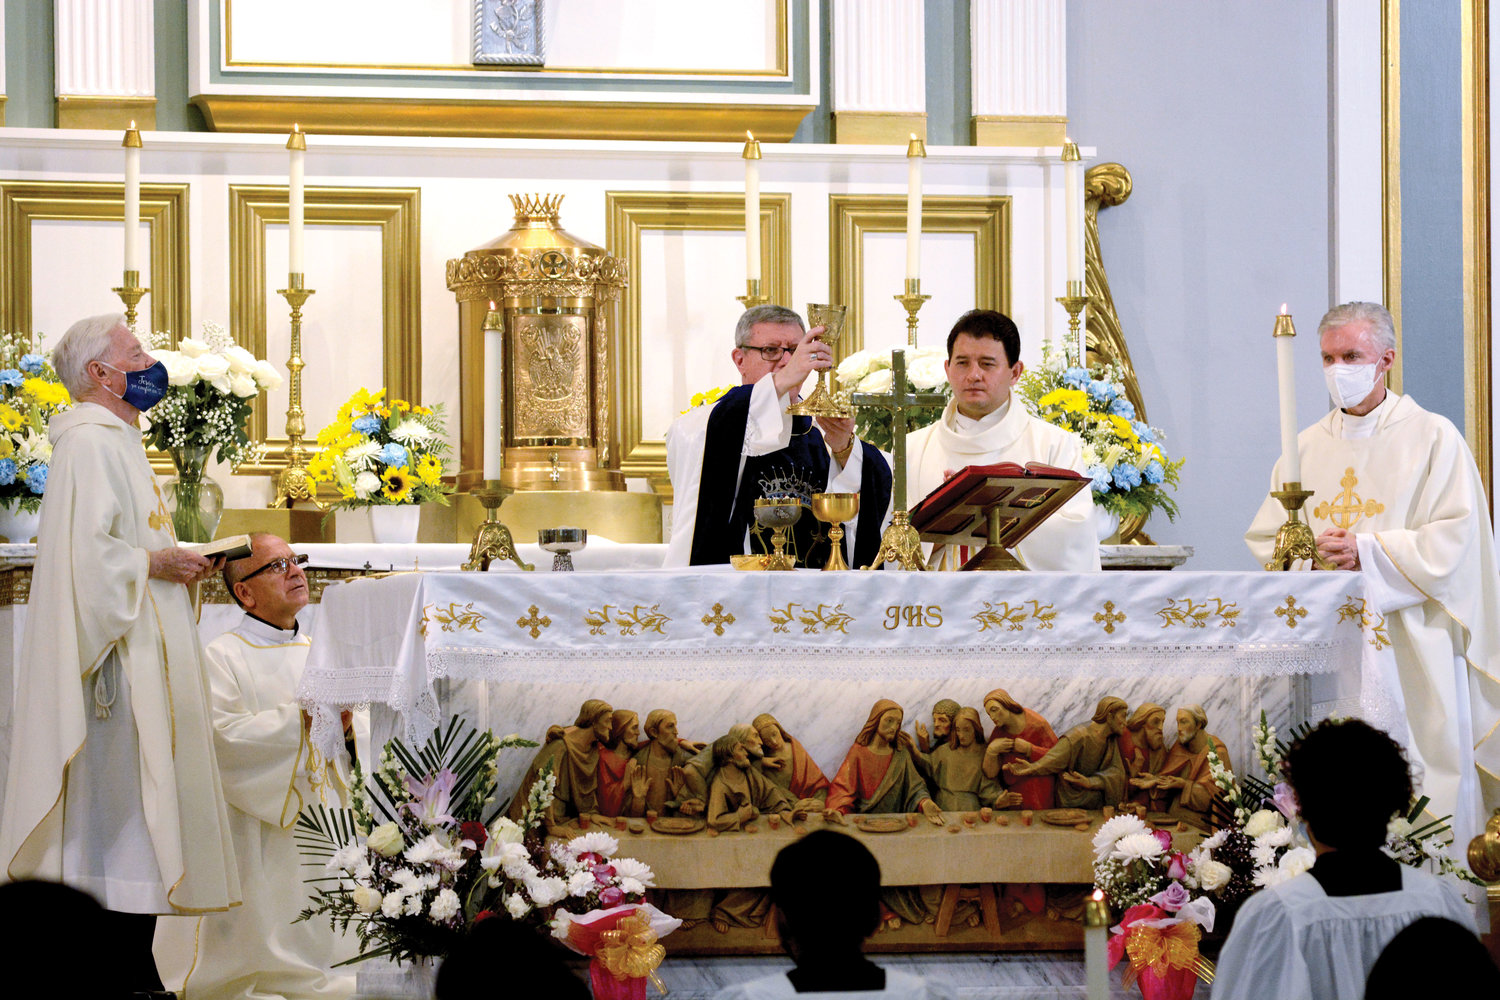 SACRED MOMENT—Auxiliary Bishop Gerardo J. Colacicco lifts the chalice during the consecration at the Vigil Mass for the feast of the Assumption of the Blessed Virgin Mary Aug. 14 at Assumption parish in Peekskill. On the altar with the bishop are, from left,
Father Richard Albertine, M.M., Deacon Carlos Campoverde (kneeling), Father Carlos Limongi, parochial vicar of Assumption, and Father Timothy Kilkelly, M.M. Right.